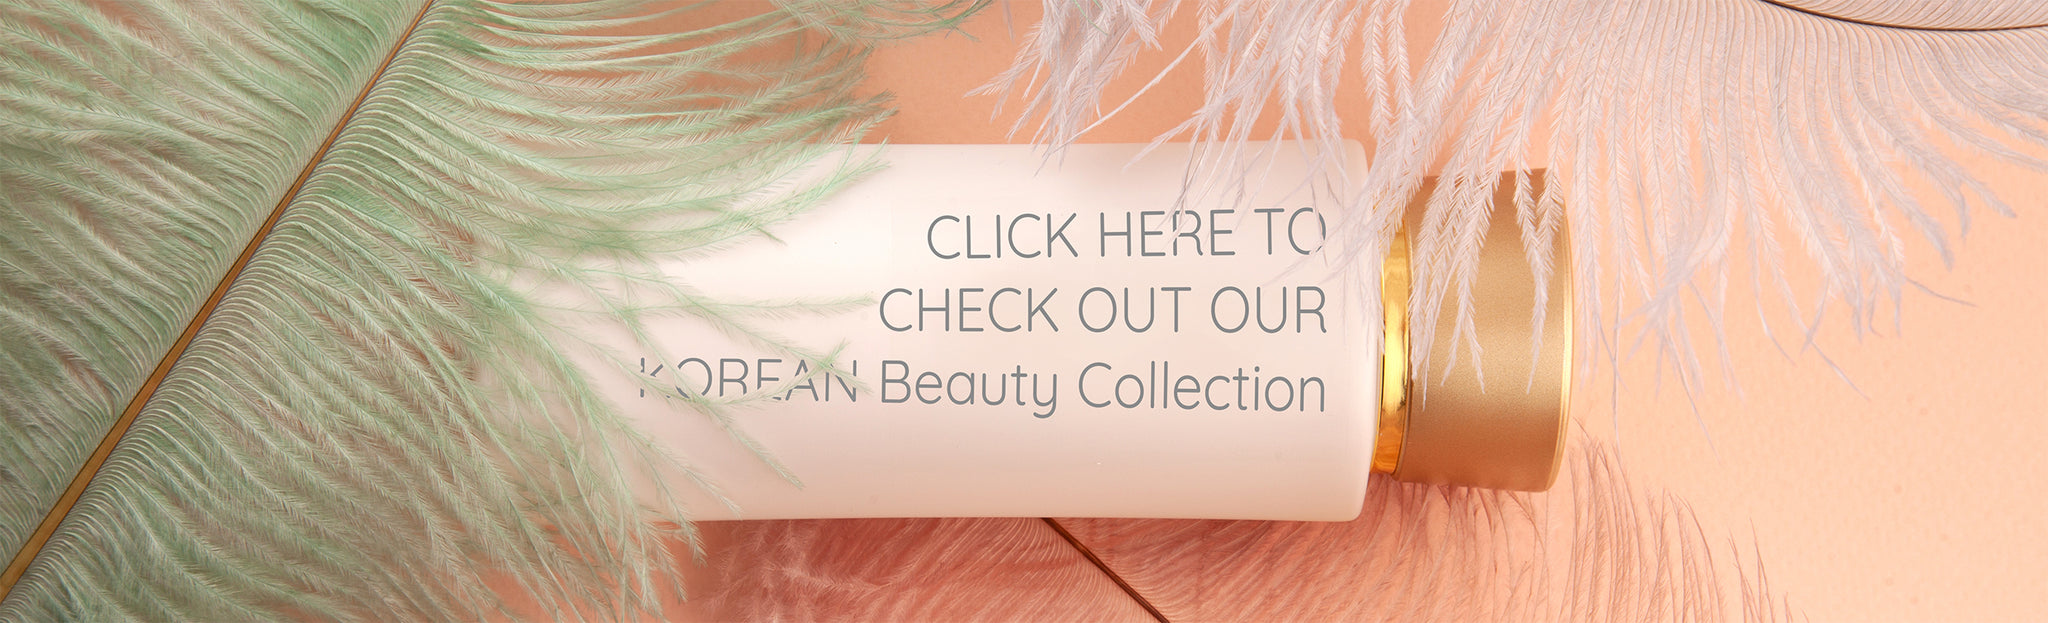 Shop now affordable and highl quality Korean beauty products.